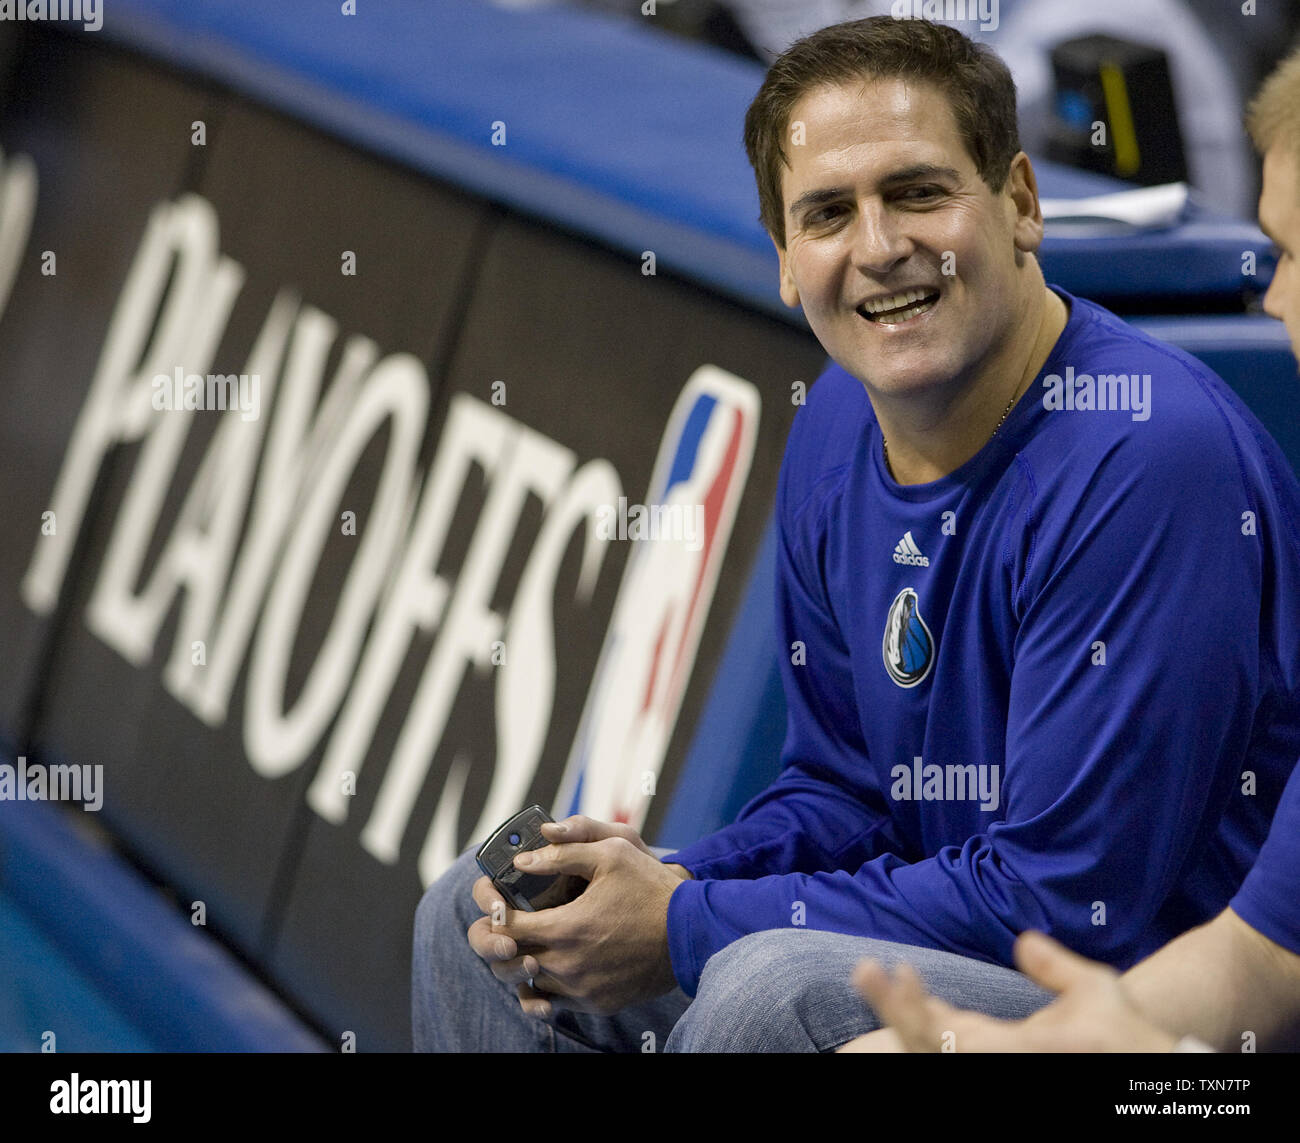 dallas-mavericks-owner-mark-cuban-watches-warm-ups-from-the-team-bench-before-game-two-of-their-western-conference-second-round-playoff-series-at-the-pepsi-center-in-denver-on-may-3-2009-denver-leads-the-series-1-0-upi-photogary-c-caskey-TXN7TP.jpg